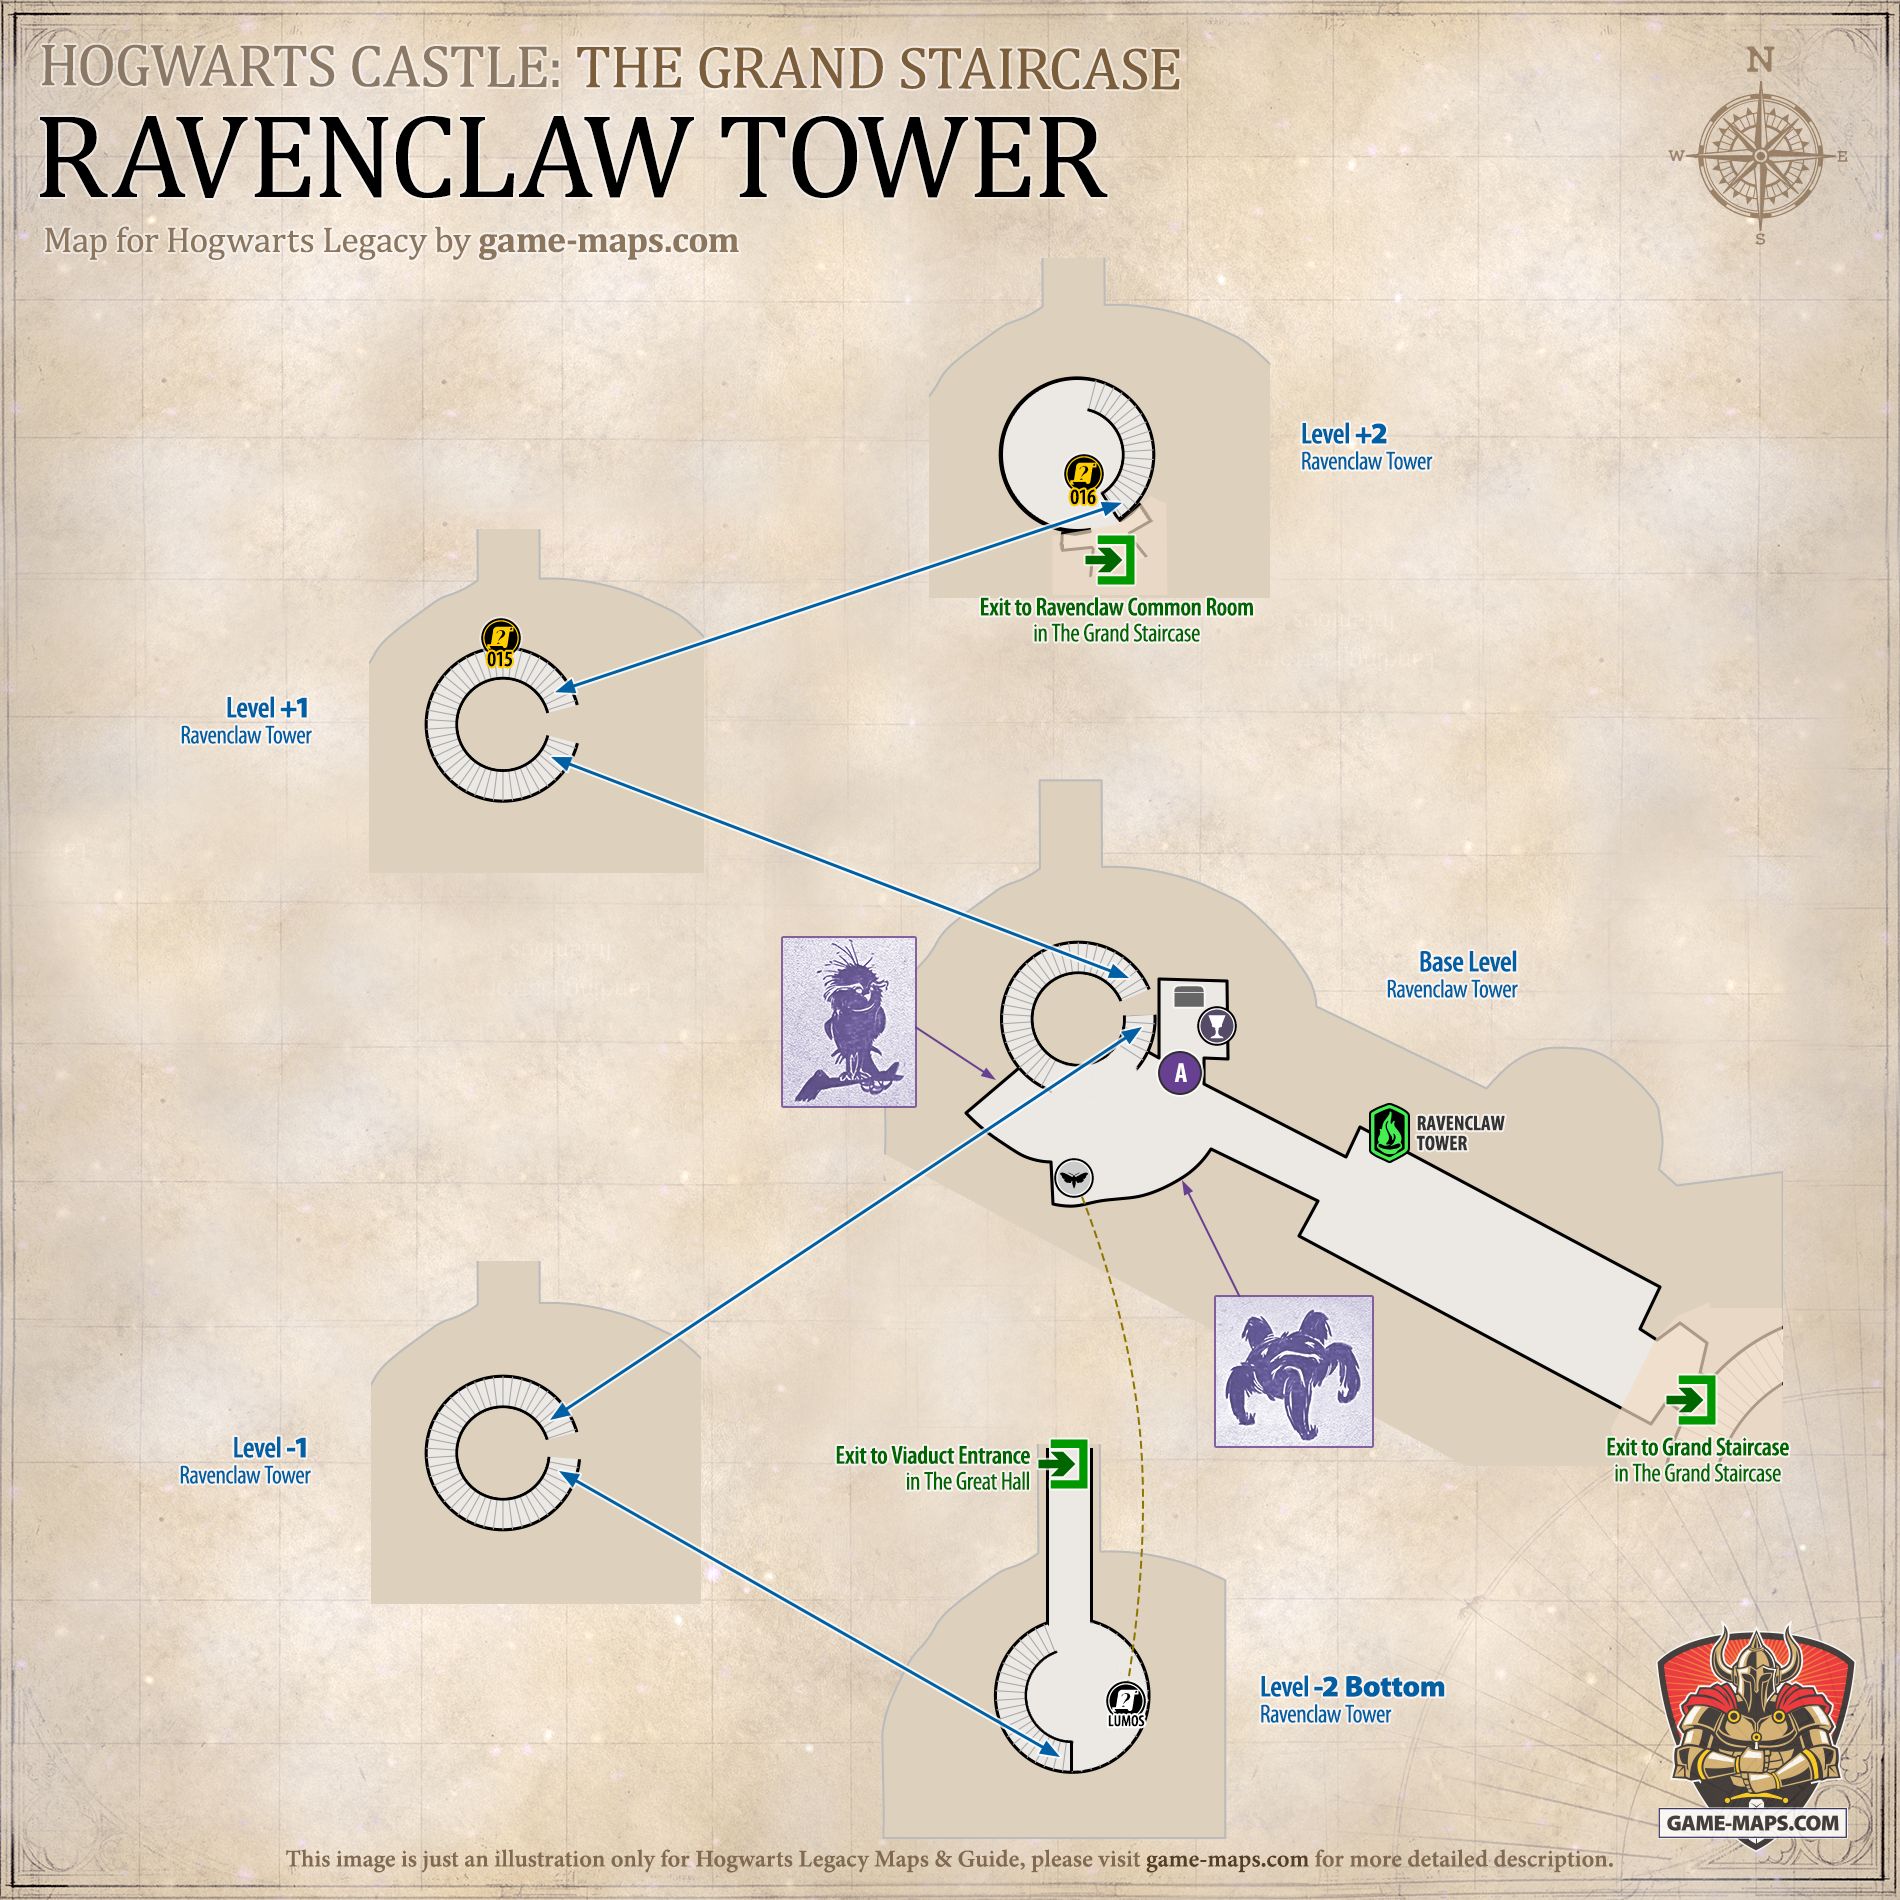 Ravenclaw Tower Map for Hogwarts Legacy